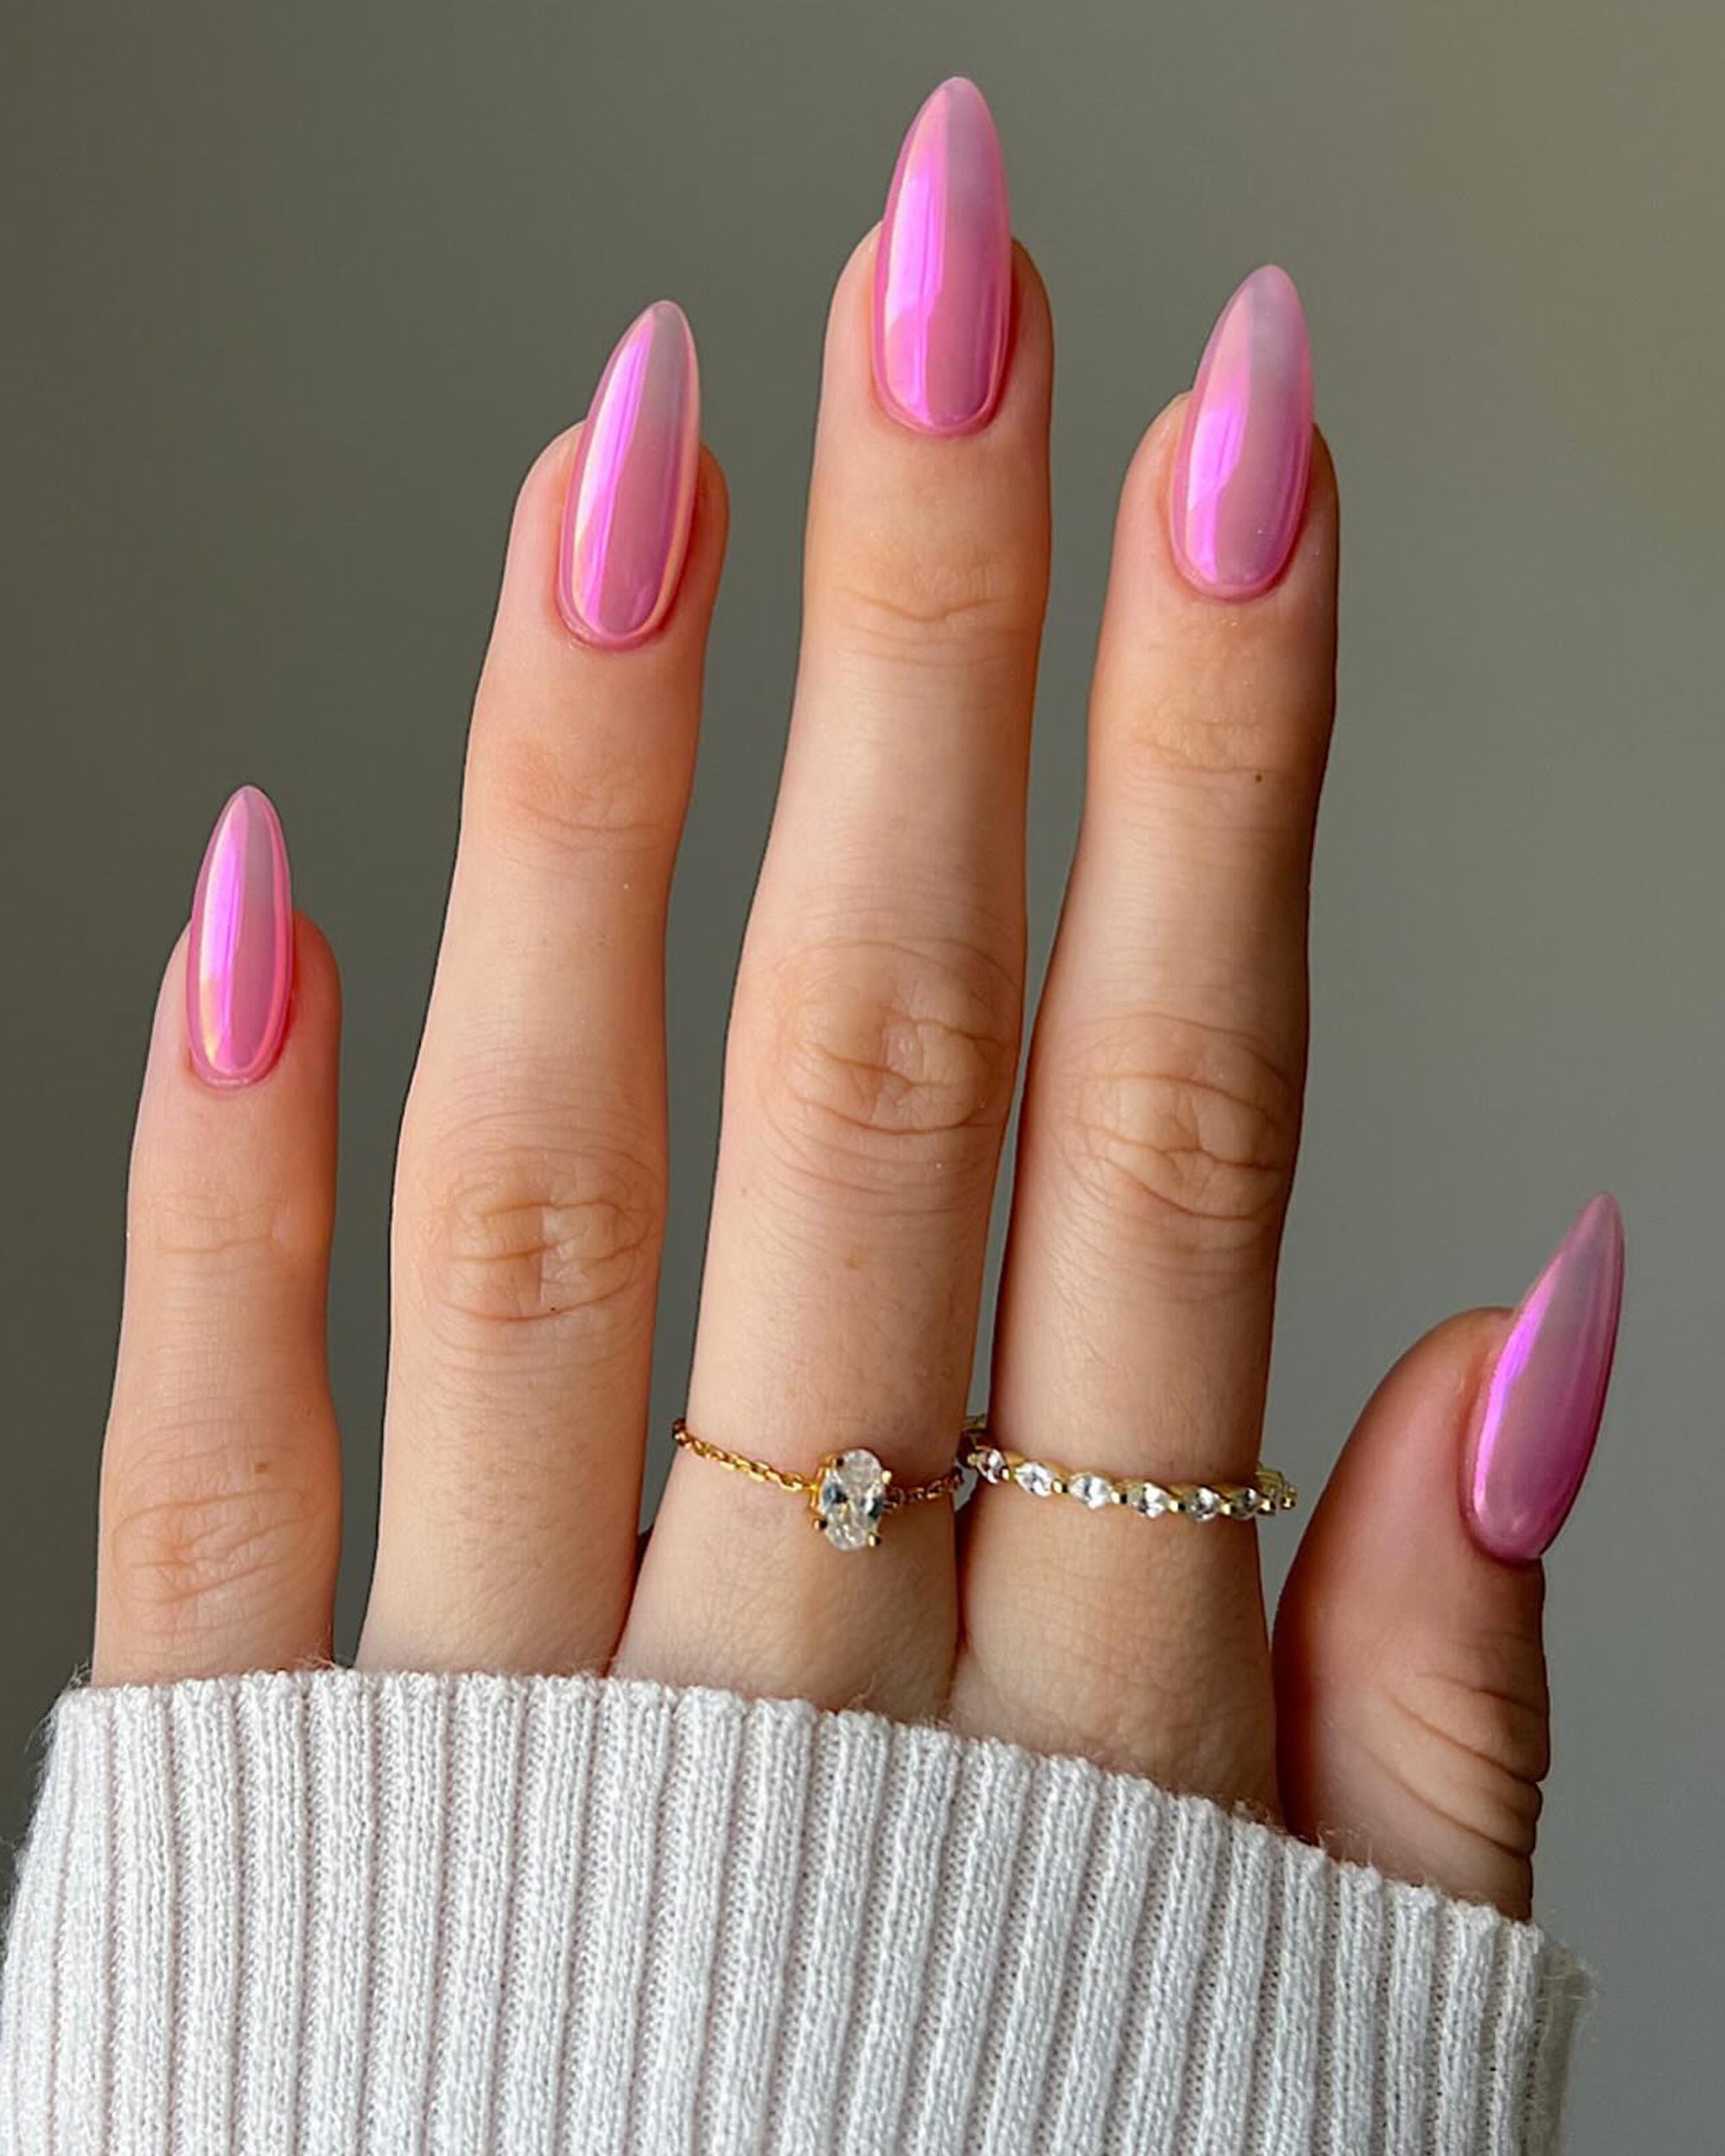 Steph's Favorite Pink Nail Polish Right Now - Fashionista